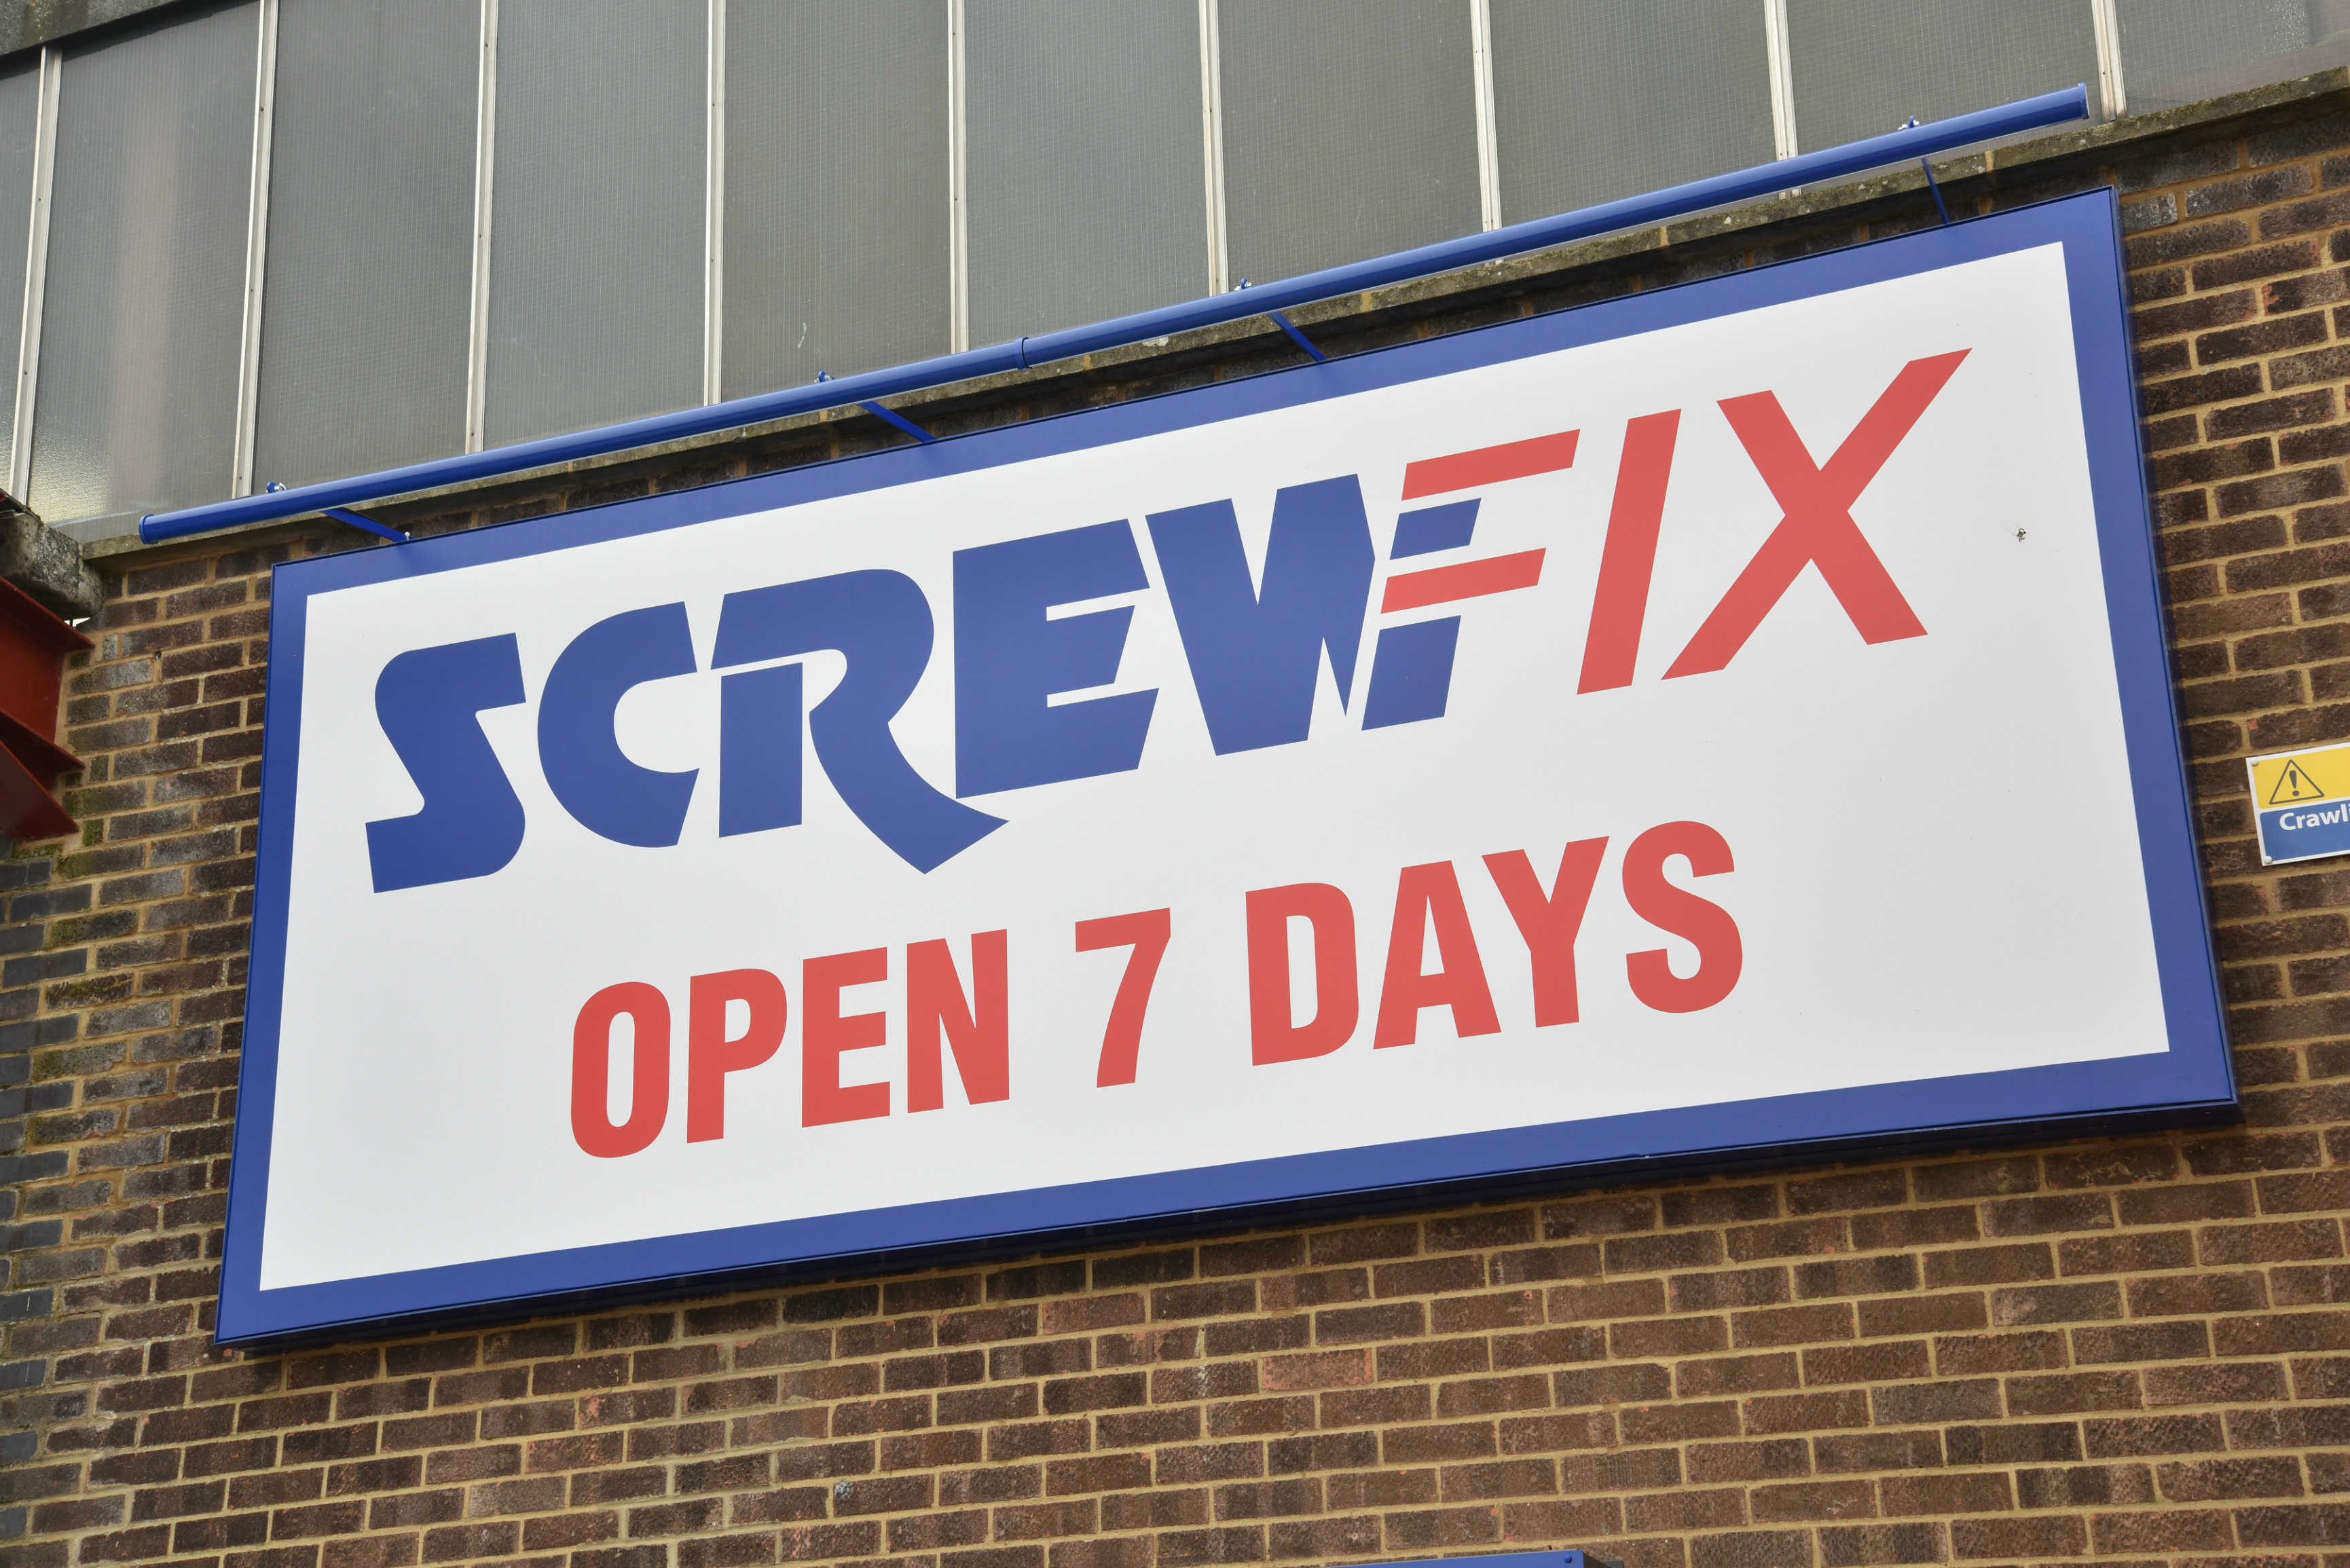 Jobs boost for Wadebridge as new Screwfix store opens